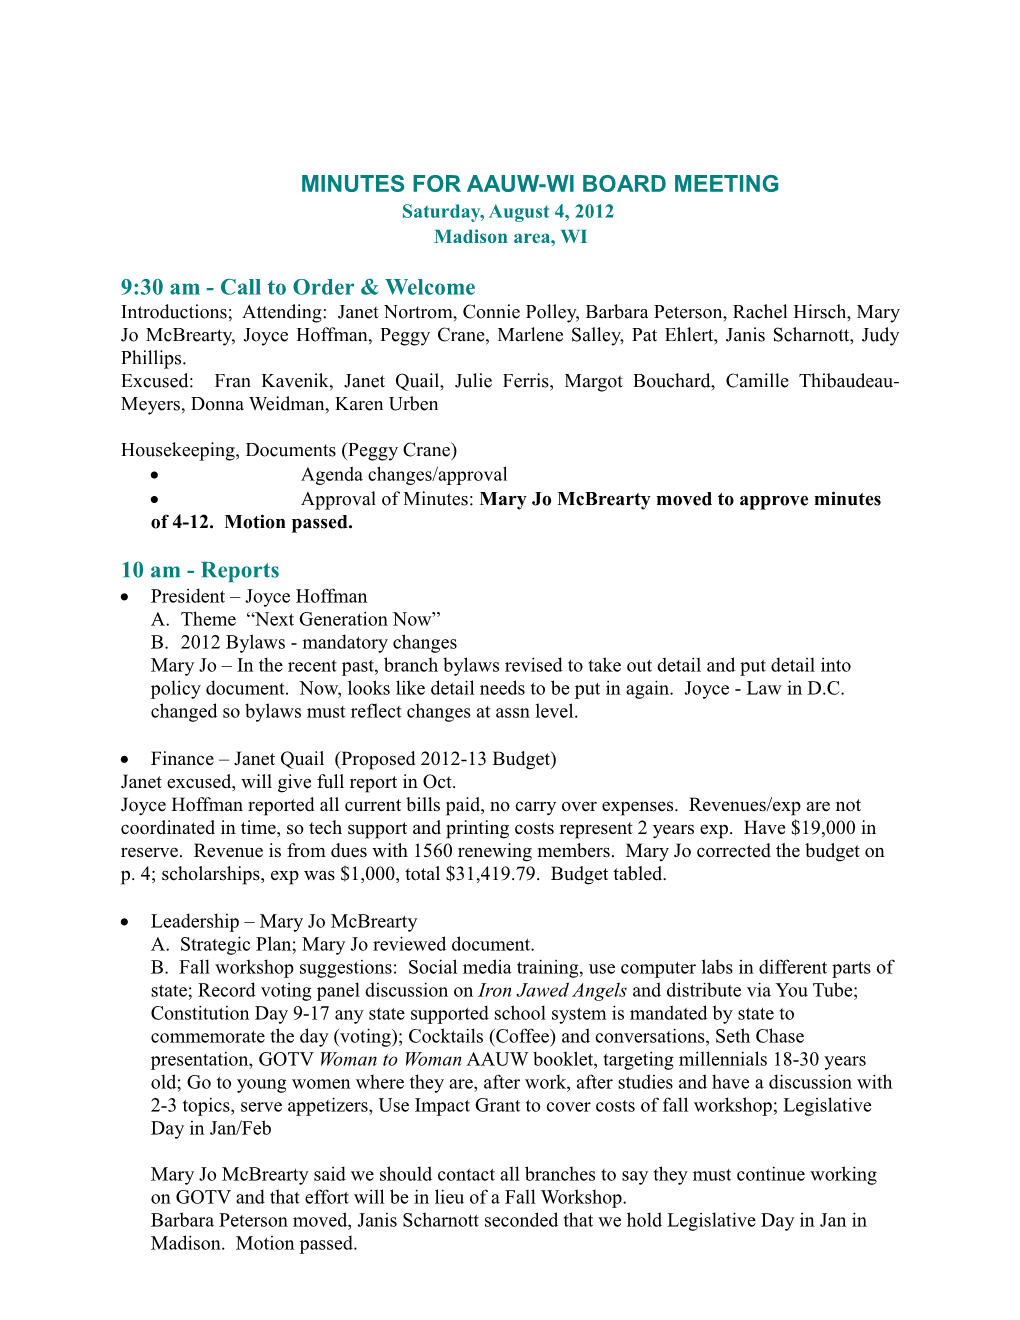 Minutes for Aauw-Wi Board Meeting